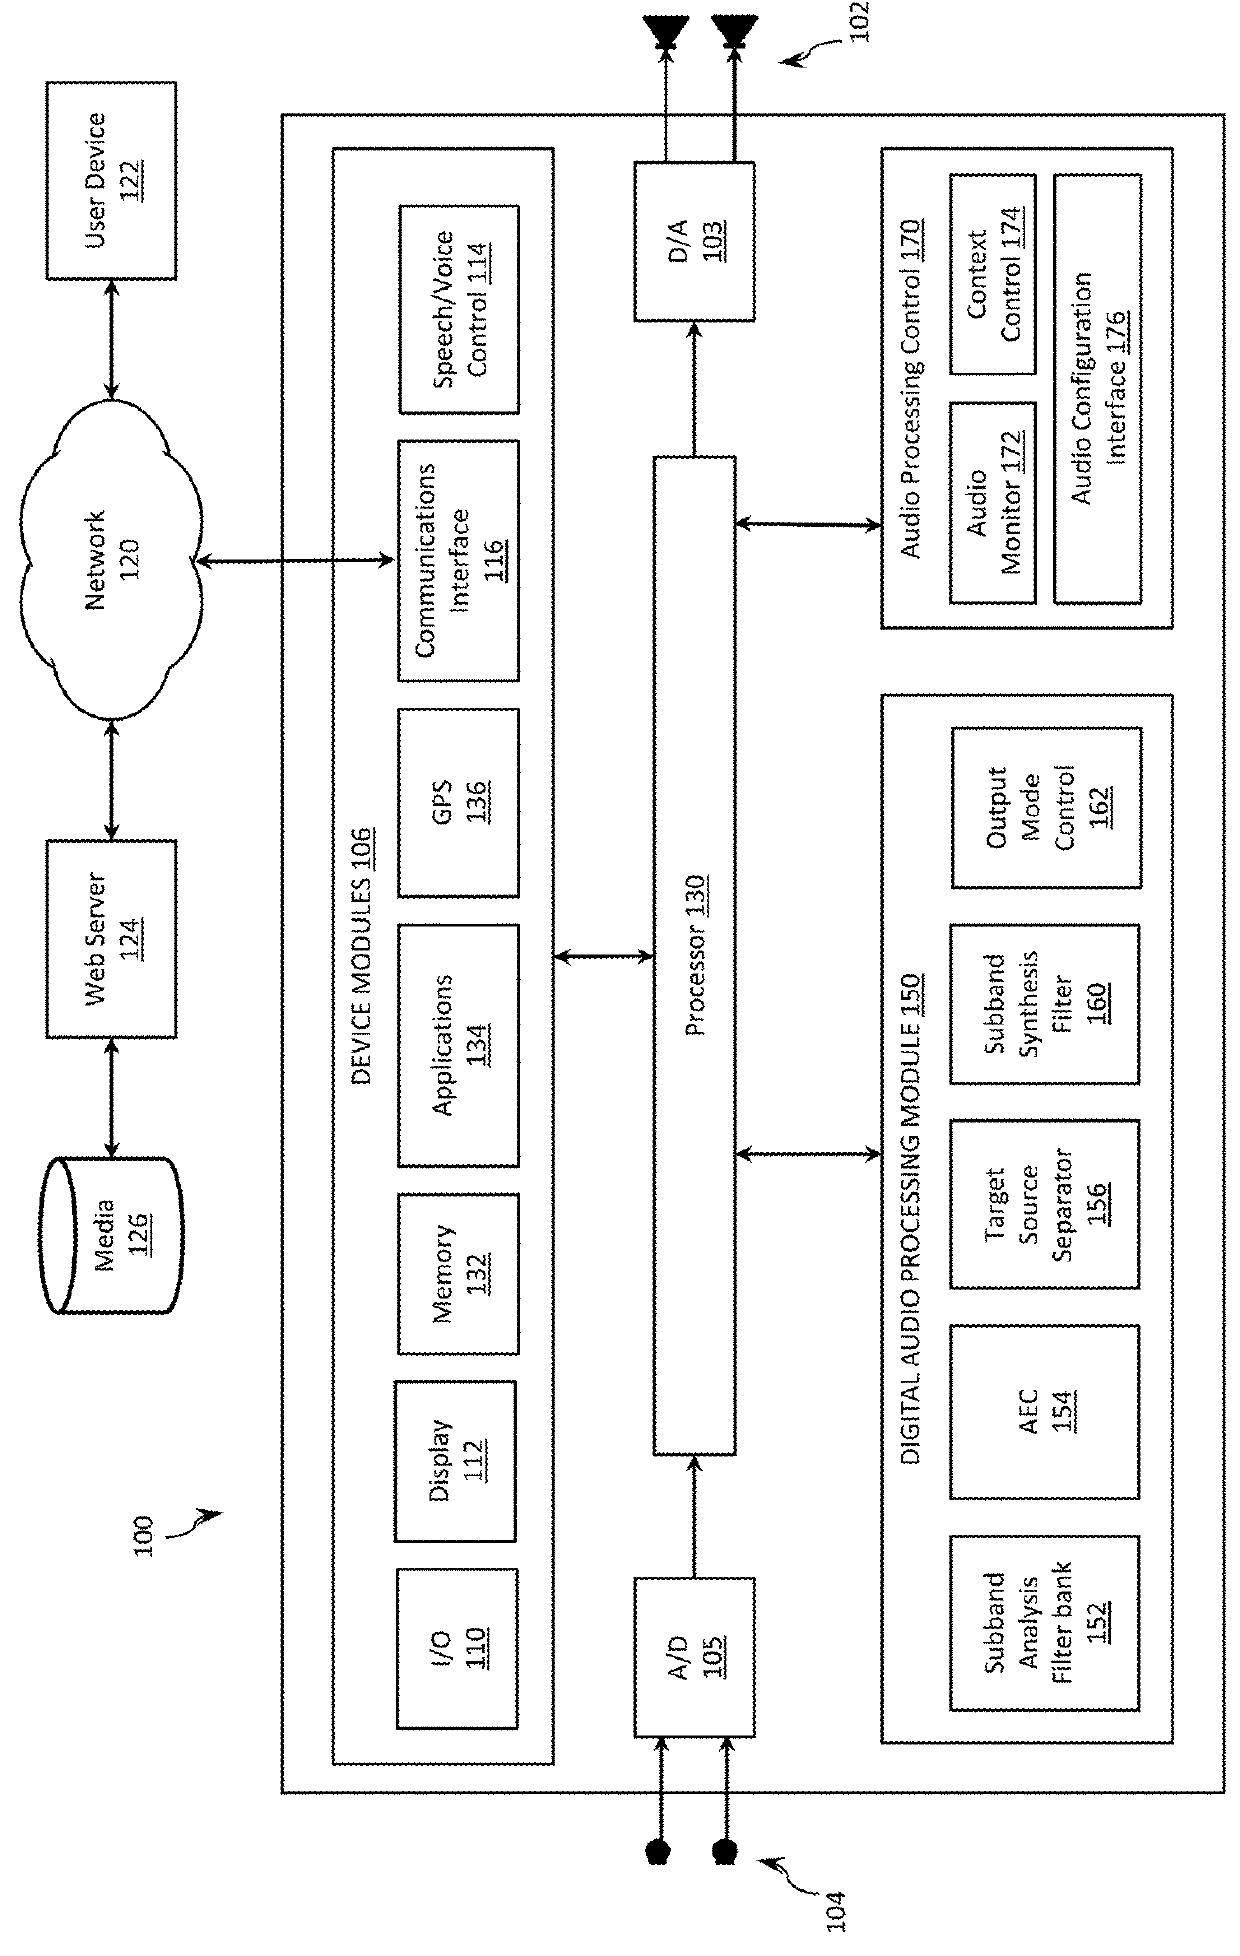 Input/output mode control for audio processing